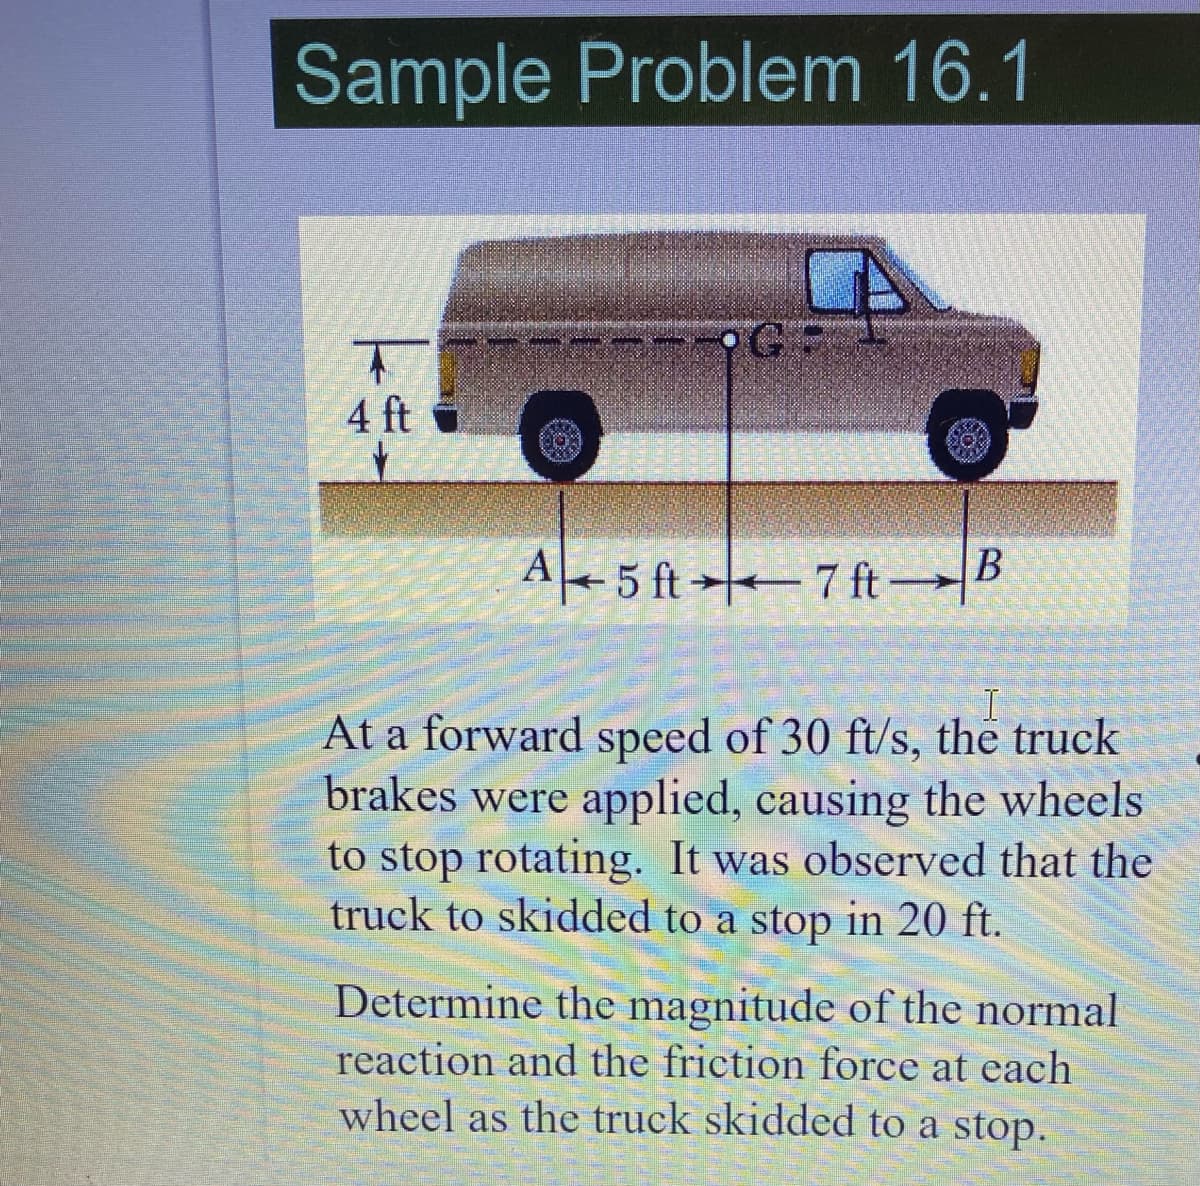 Sample Problem 16.1
4 ft
A+ 5 ft→ 7 ftB
At a forward speed of 30 ft/s, the truck
brakes were applied, causing the wheels
to stop rotating. It was observed that the
truck to skidded to a stop in 20 ft.
Determine the magnitude of the normal
reaction and the friction force at each
wheel as the truck skidded to a stop.
